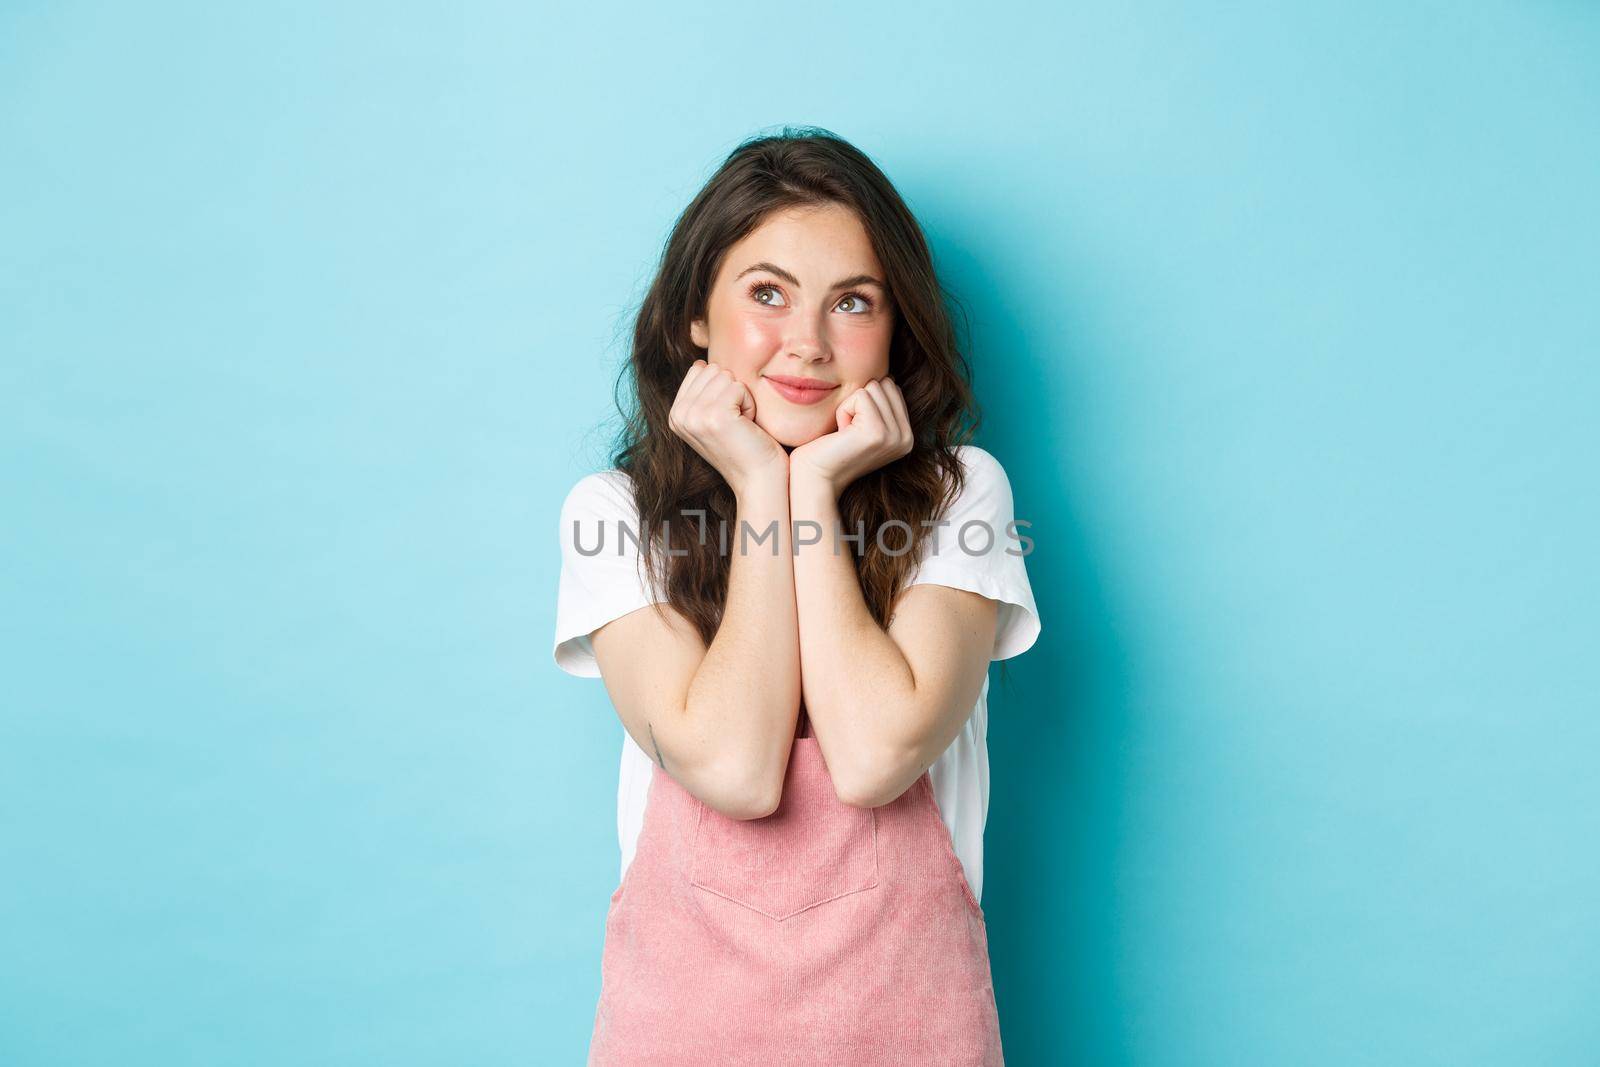 Cute dreamy girl thinking, imaging something, lean head on hands and looking at upper left corner, daydreaming, standing over blue background.